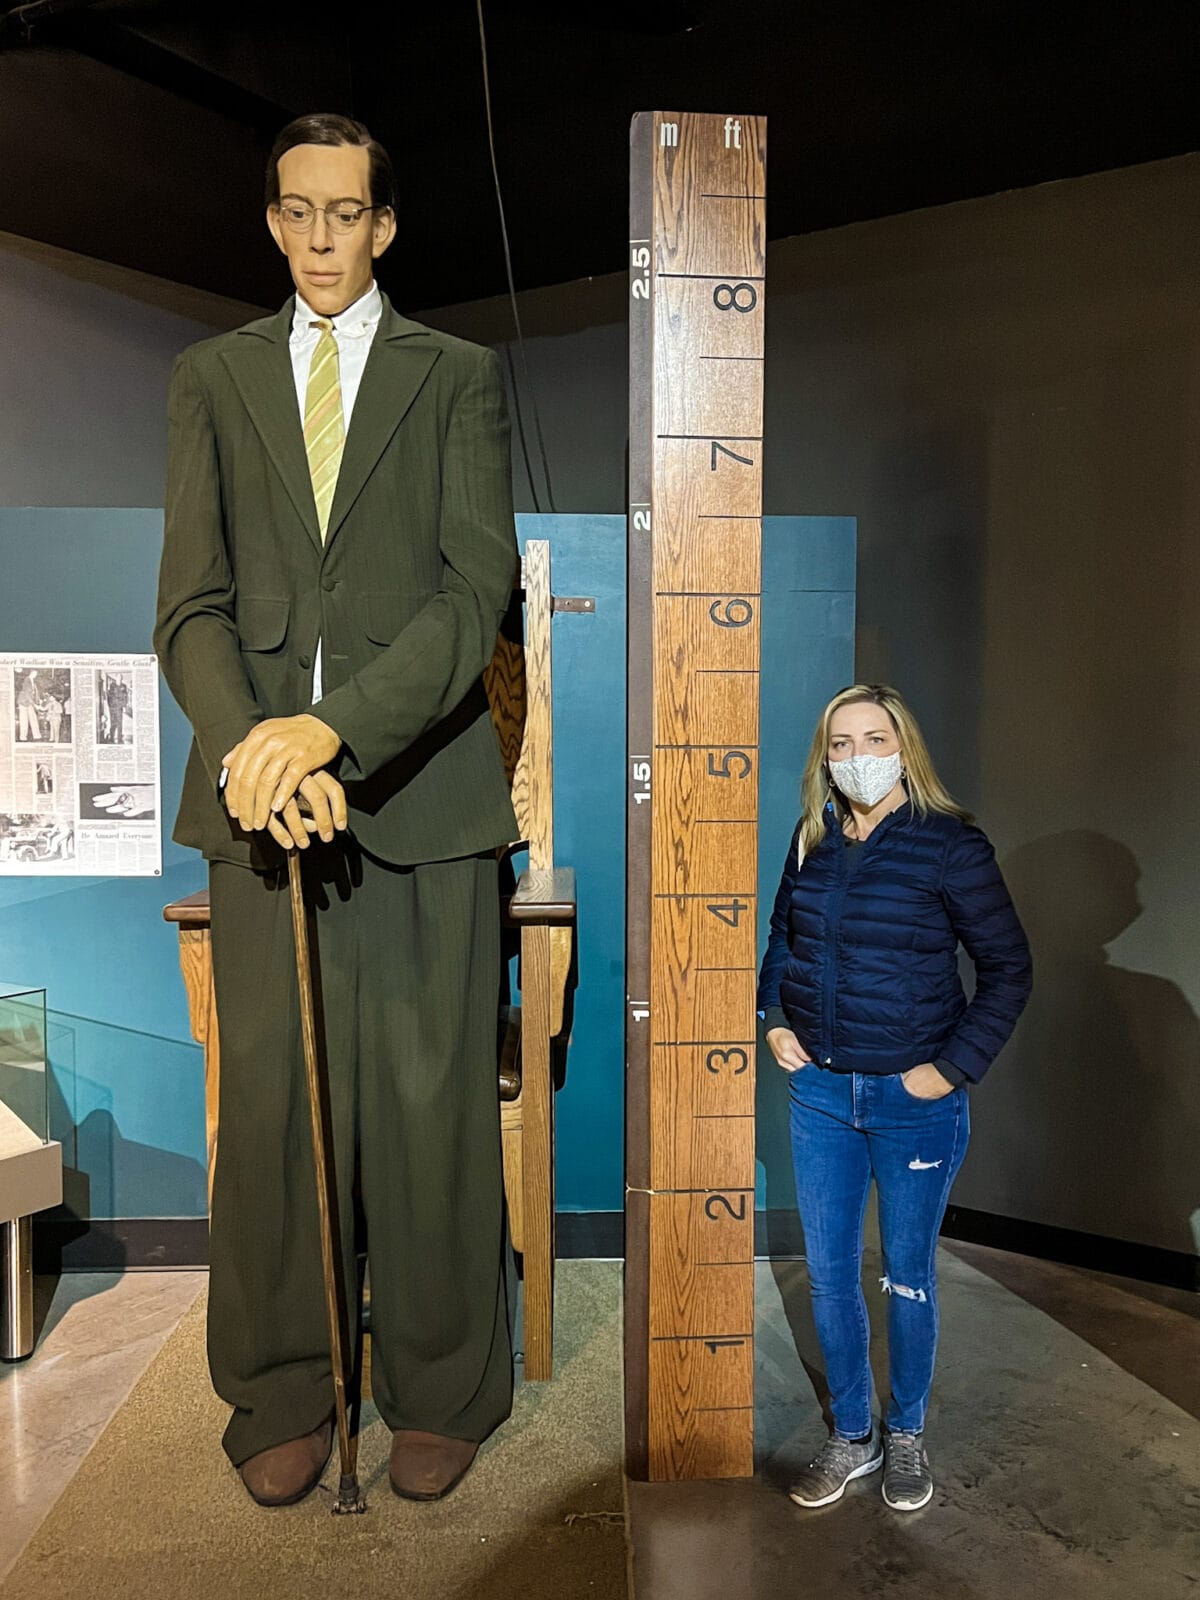 The world's tallest man at Ripley's Believe It or Not Scottsdale